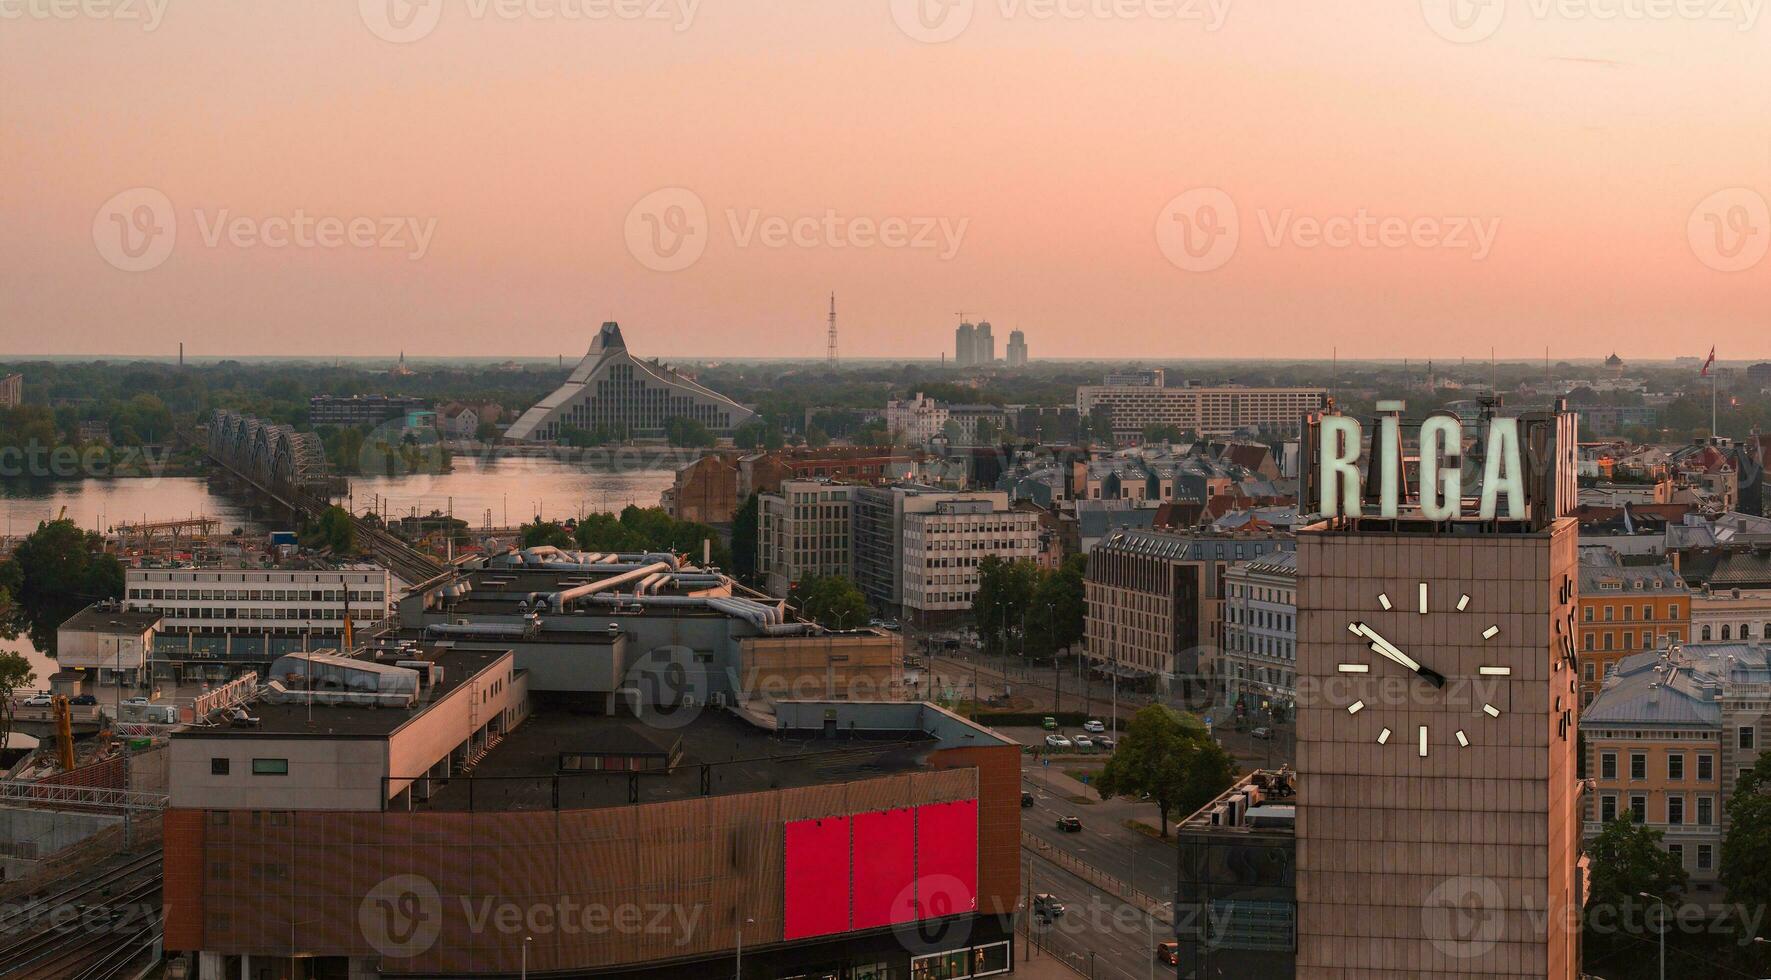 Summer sunset in Riga, Latvia. Aerial view of Riga, the capital of Latvia at sunset. photo